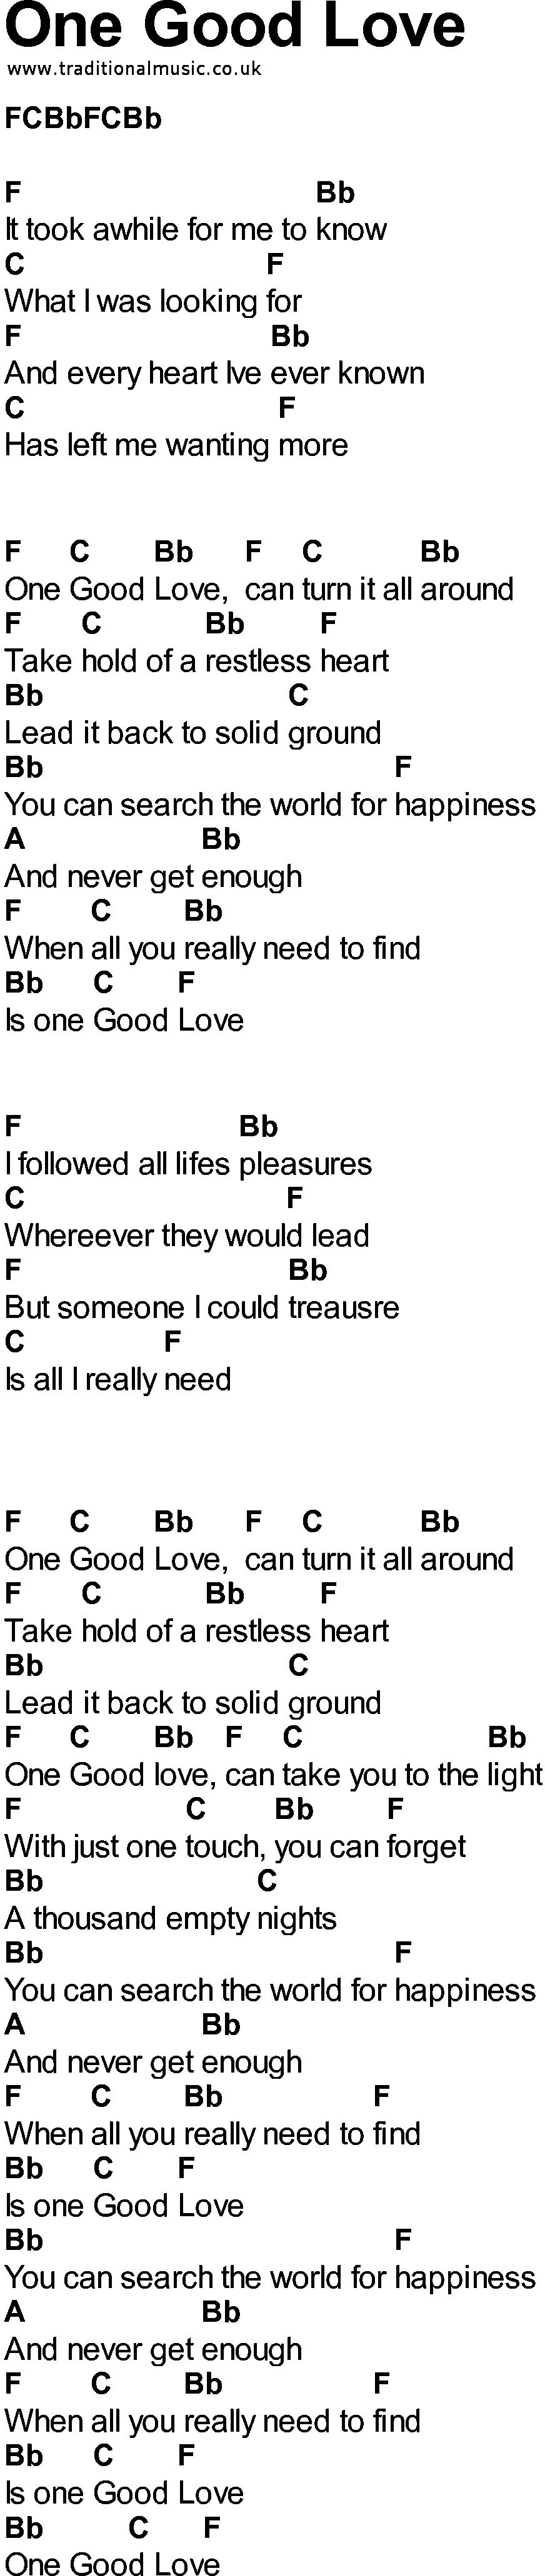 Bluegrass songs with chords - One Good Love